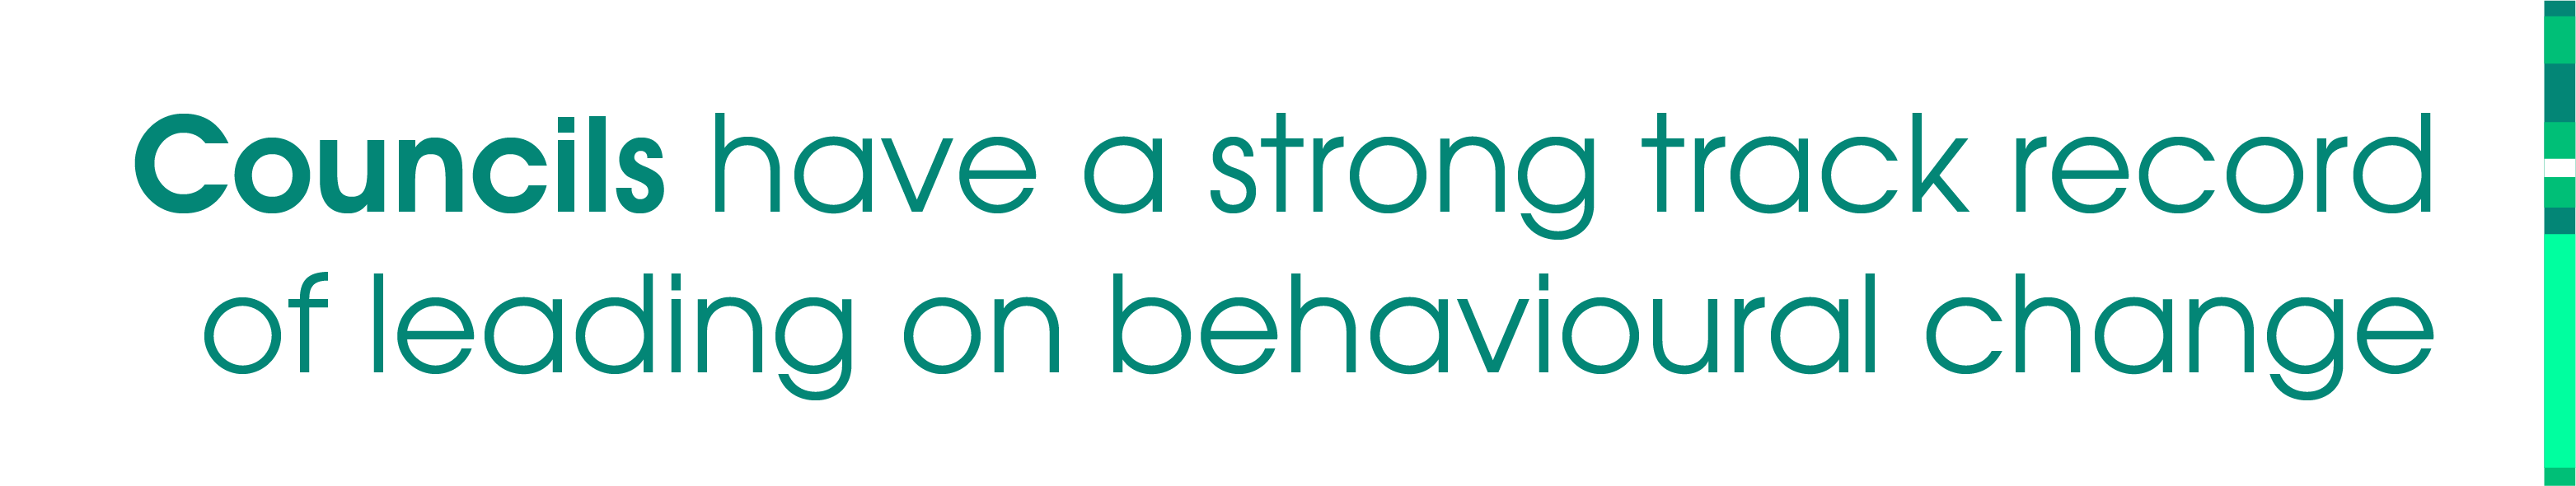 Councils have a strong track record of leading on behavioural change.